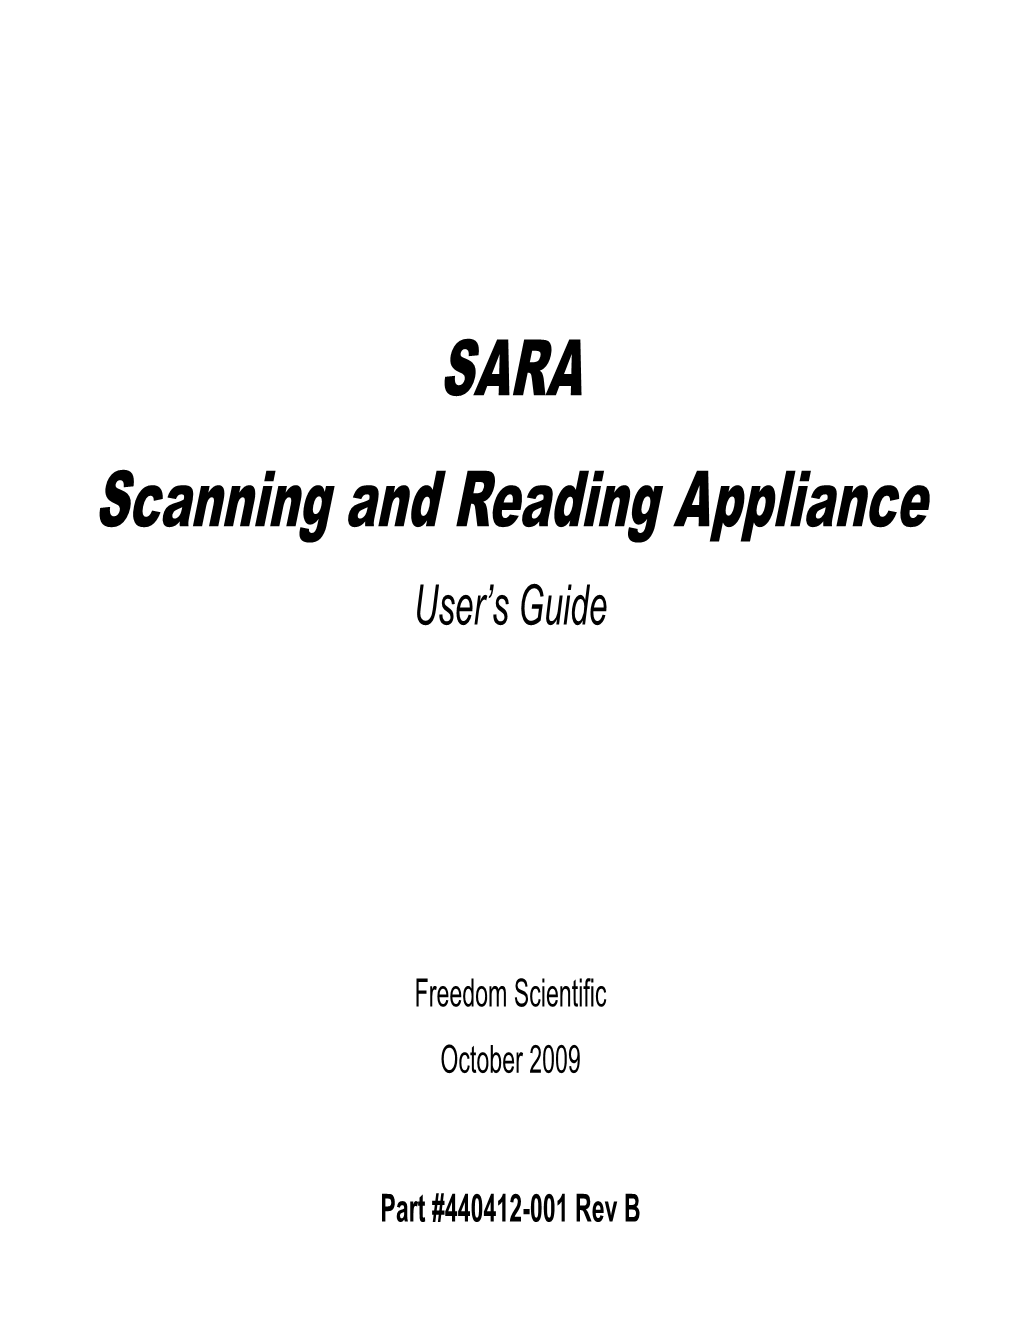 SARA Scanning and Reading Appliance User’S Guide